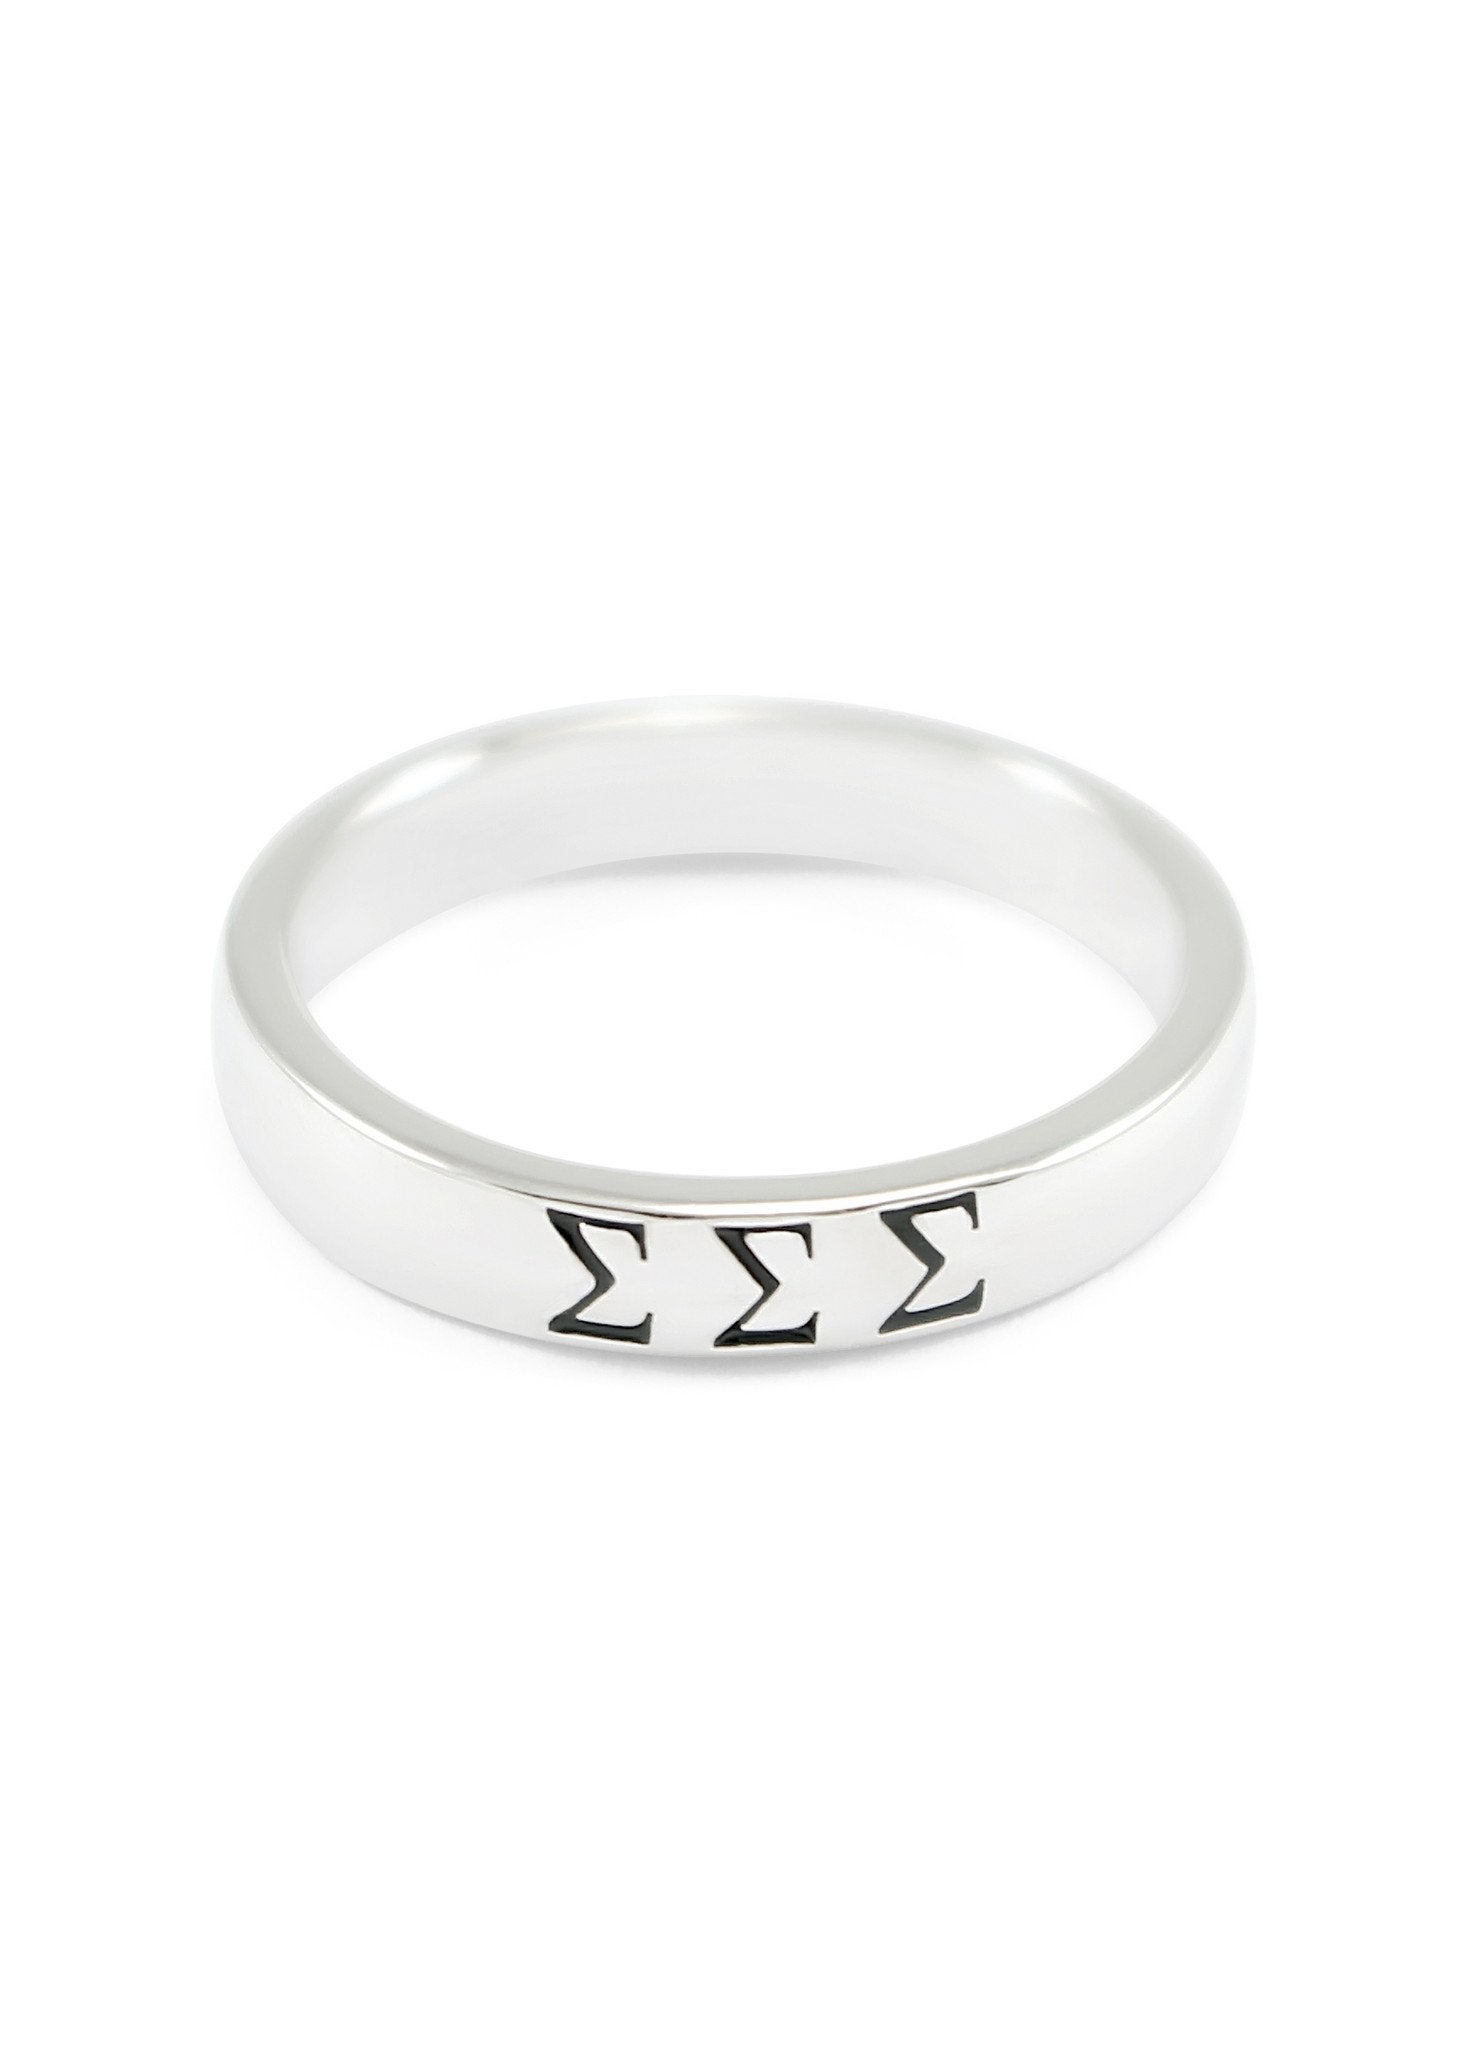 Sorority Sterling Silver Band with Stamped Greek Letters